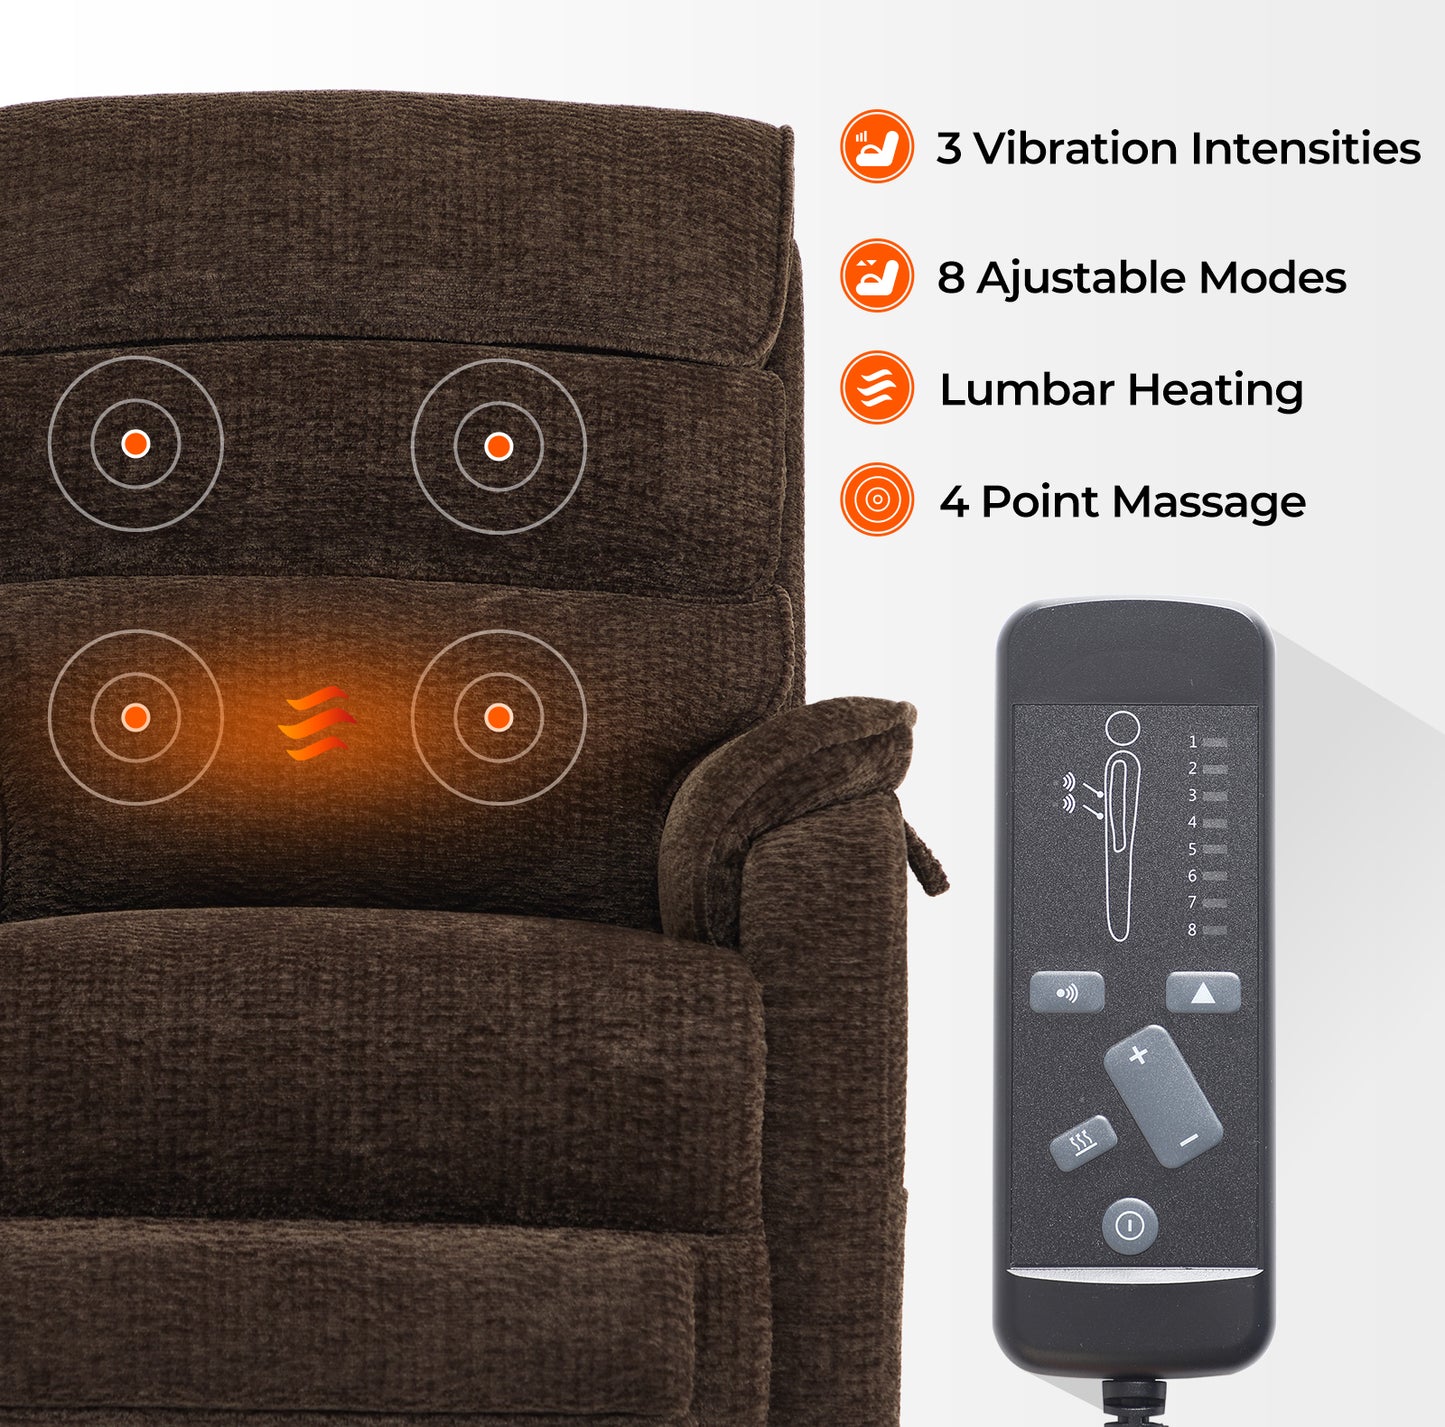 Best Recliner For Tall Man With Heat And Massage(Lay Flat)